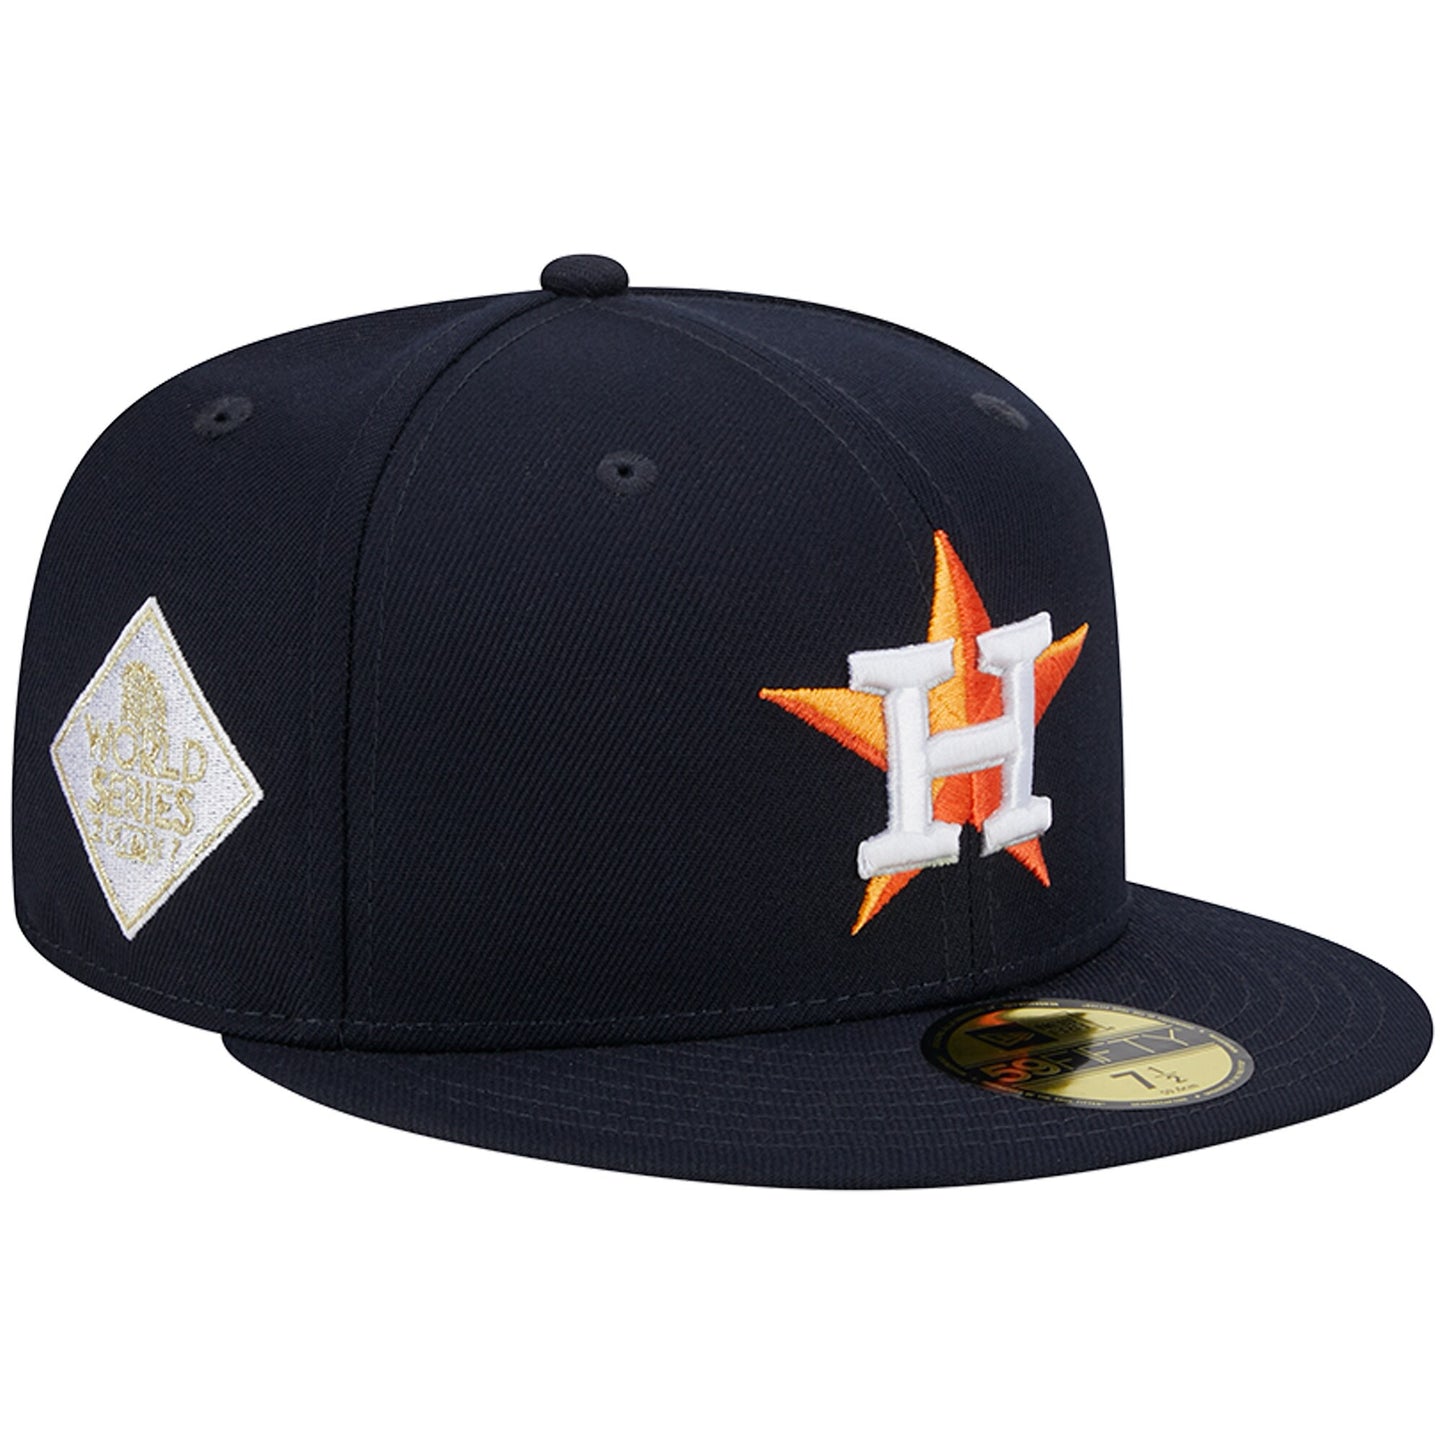 Houston Astros New Era 2017 World Series Team Color 59FIFTY Fitted Hat - Navy